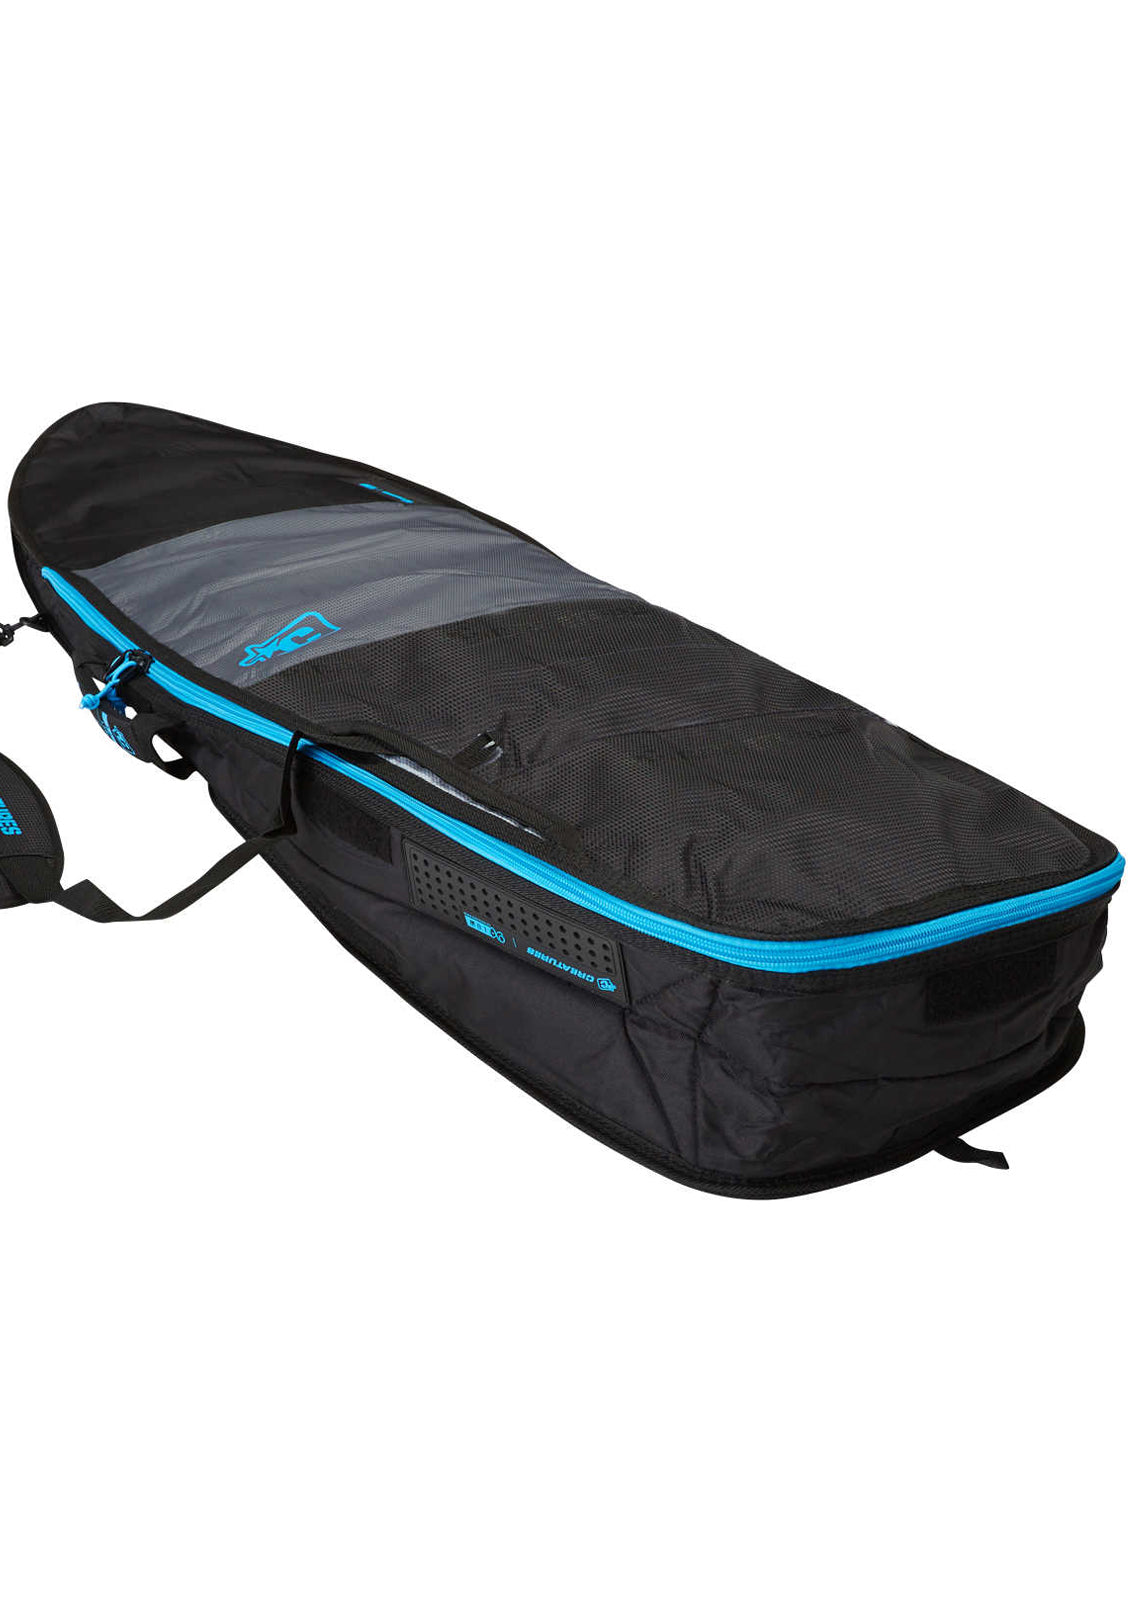 Creatures of Leisure Day Use DT2.0 Shortboard Boardbag